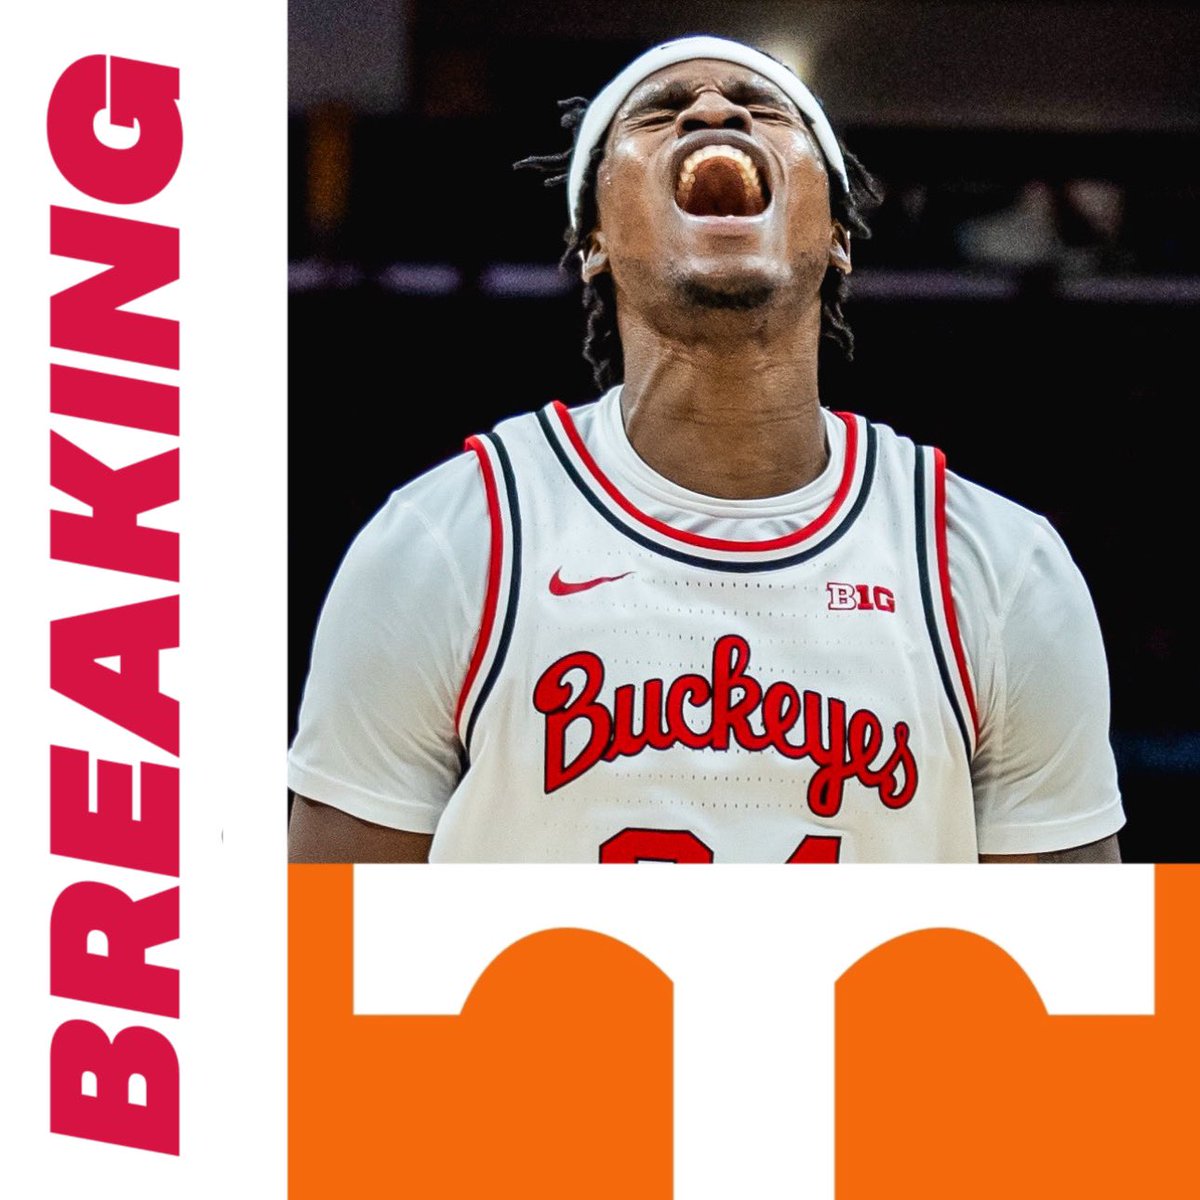 BREAKING: Ohio State C transfer Center Felix Okpara has committed to Tennessee.🍊

The 6-11 forward averaged 6.6PPG, 6.4RPG and 2.3BPG for the Buckeyes this season. 

He finished 2nd in the BIG 10 for blocks per game.